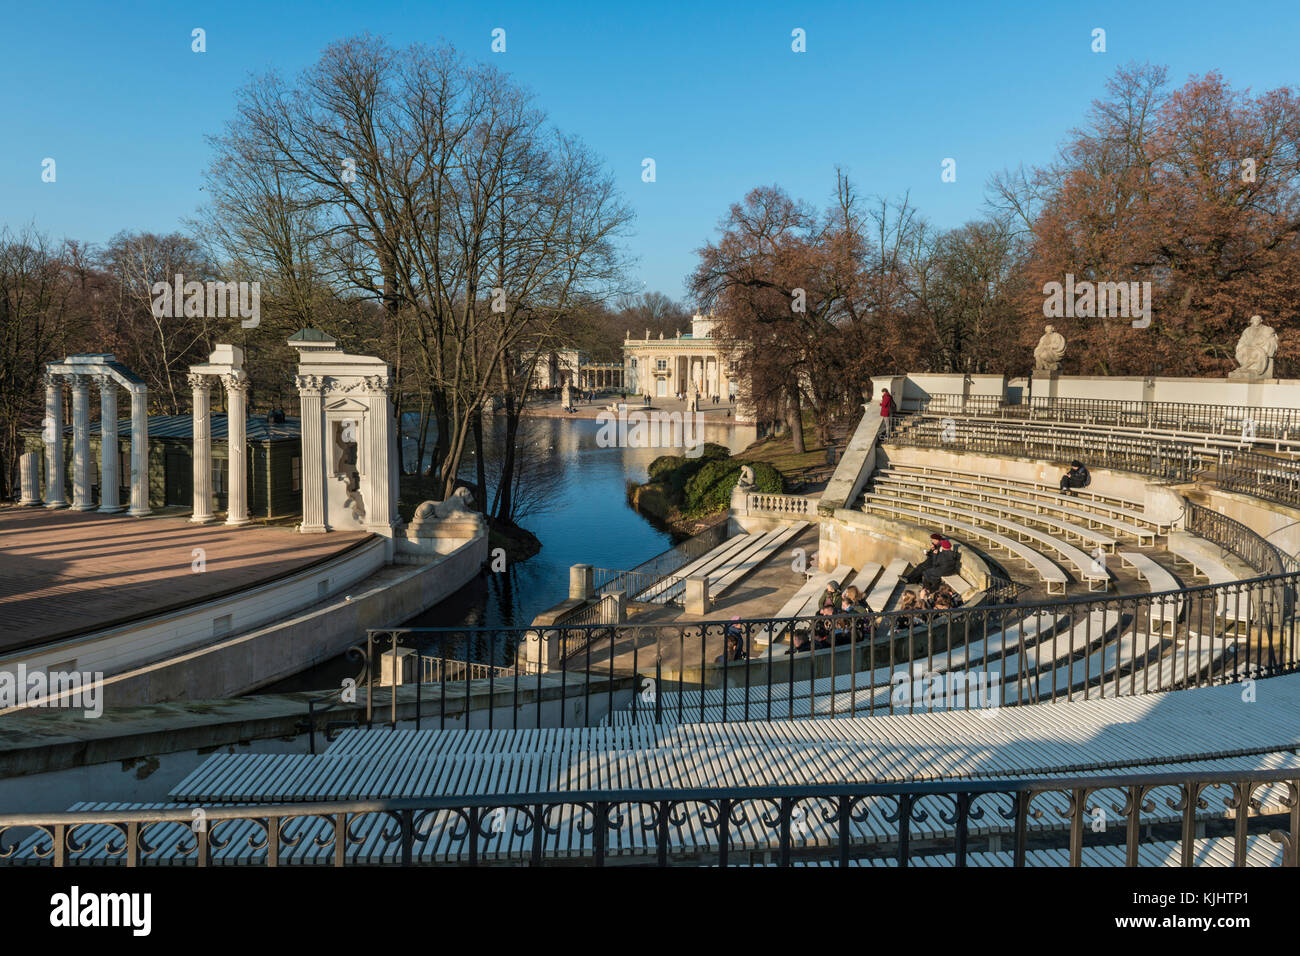 Palace on the Water and the amphitheatre of the Palace on the Isle at the Warsaw's Royal Baths Park. Stock Photo